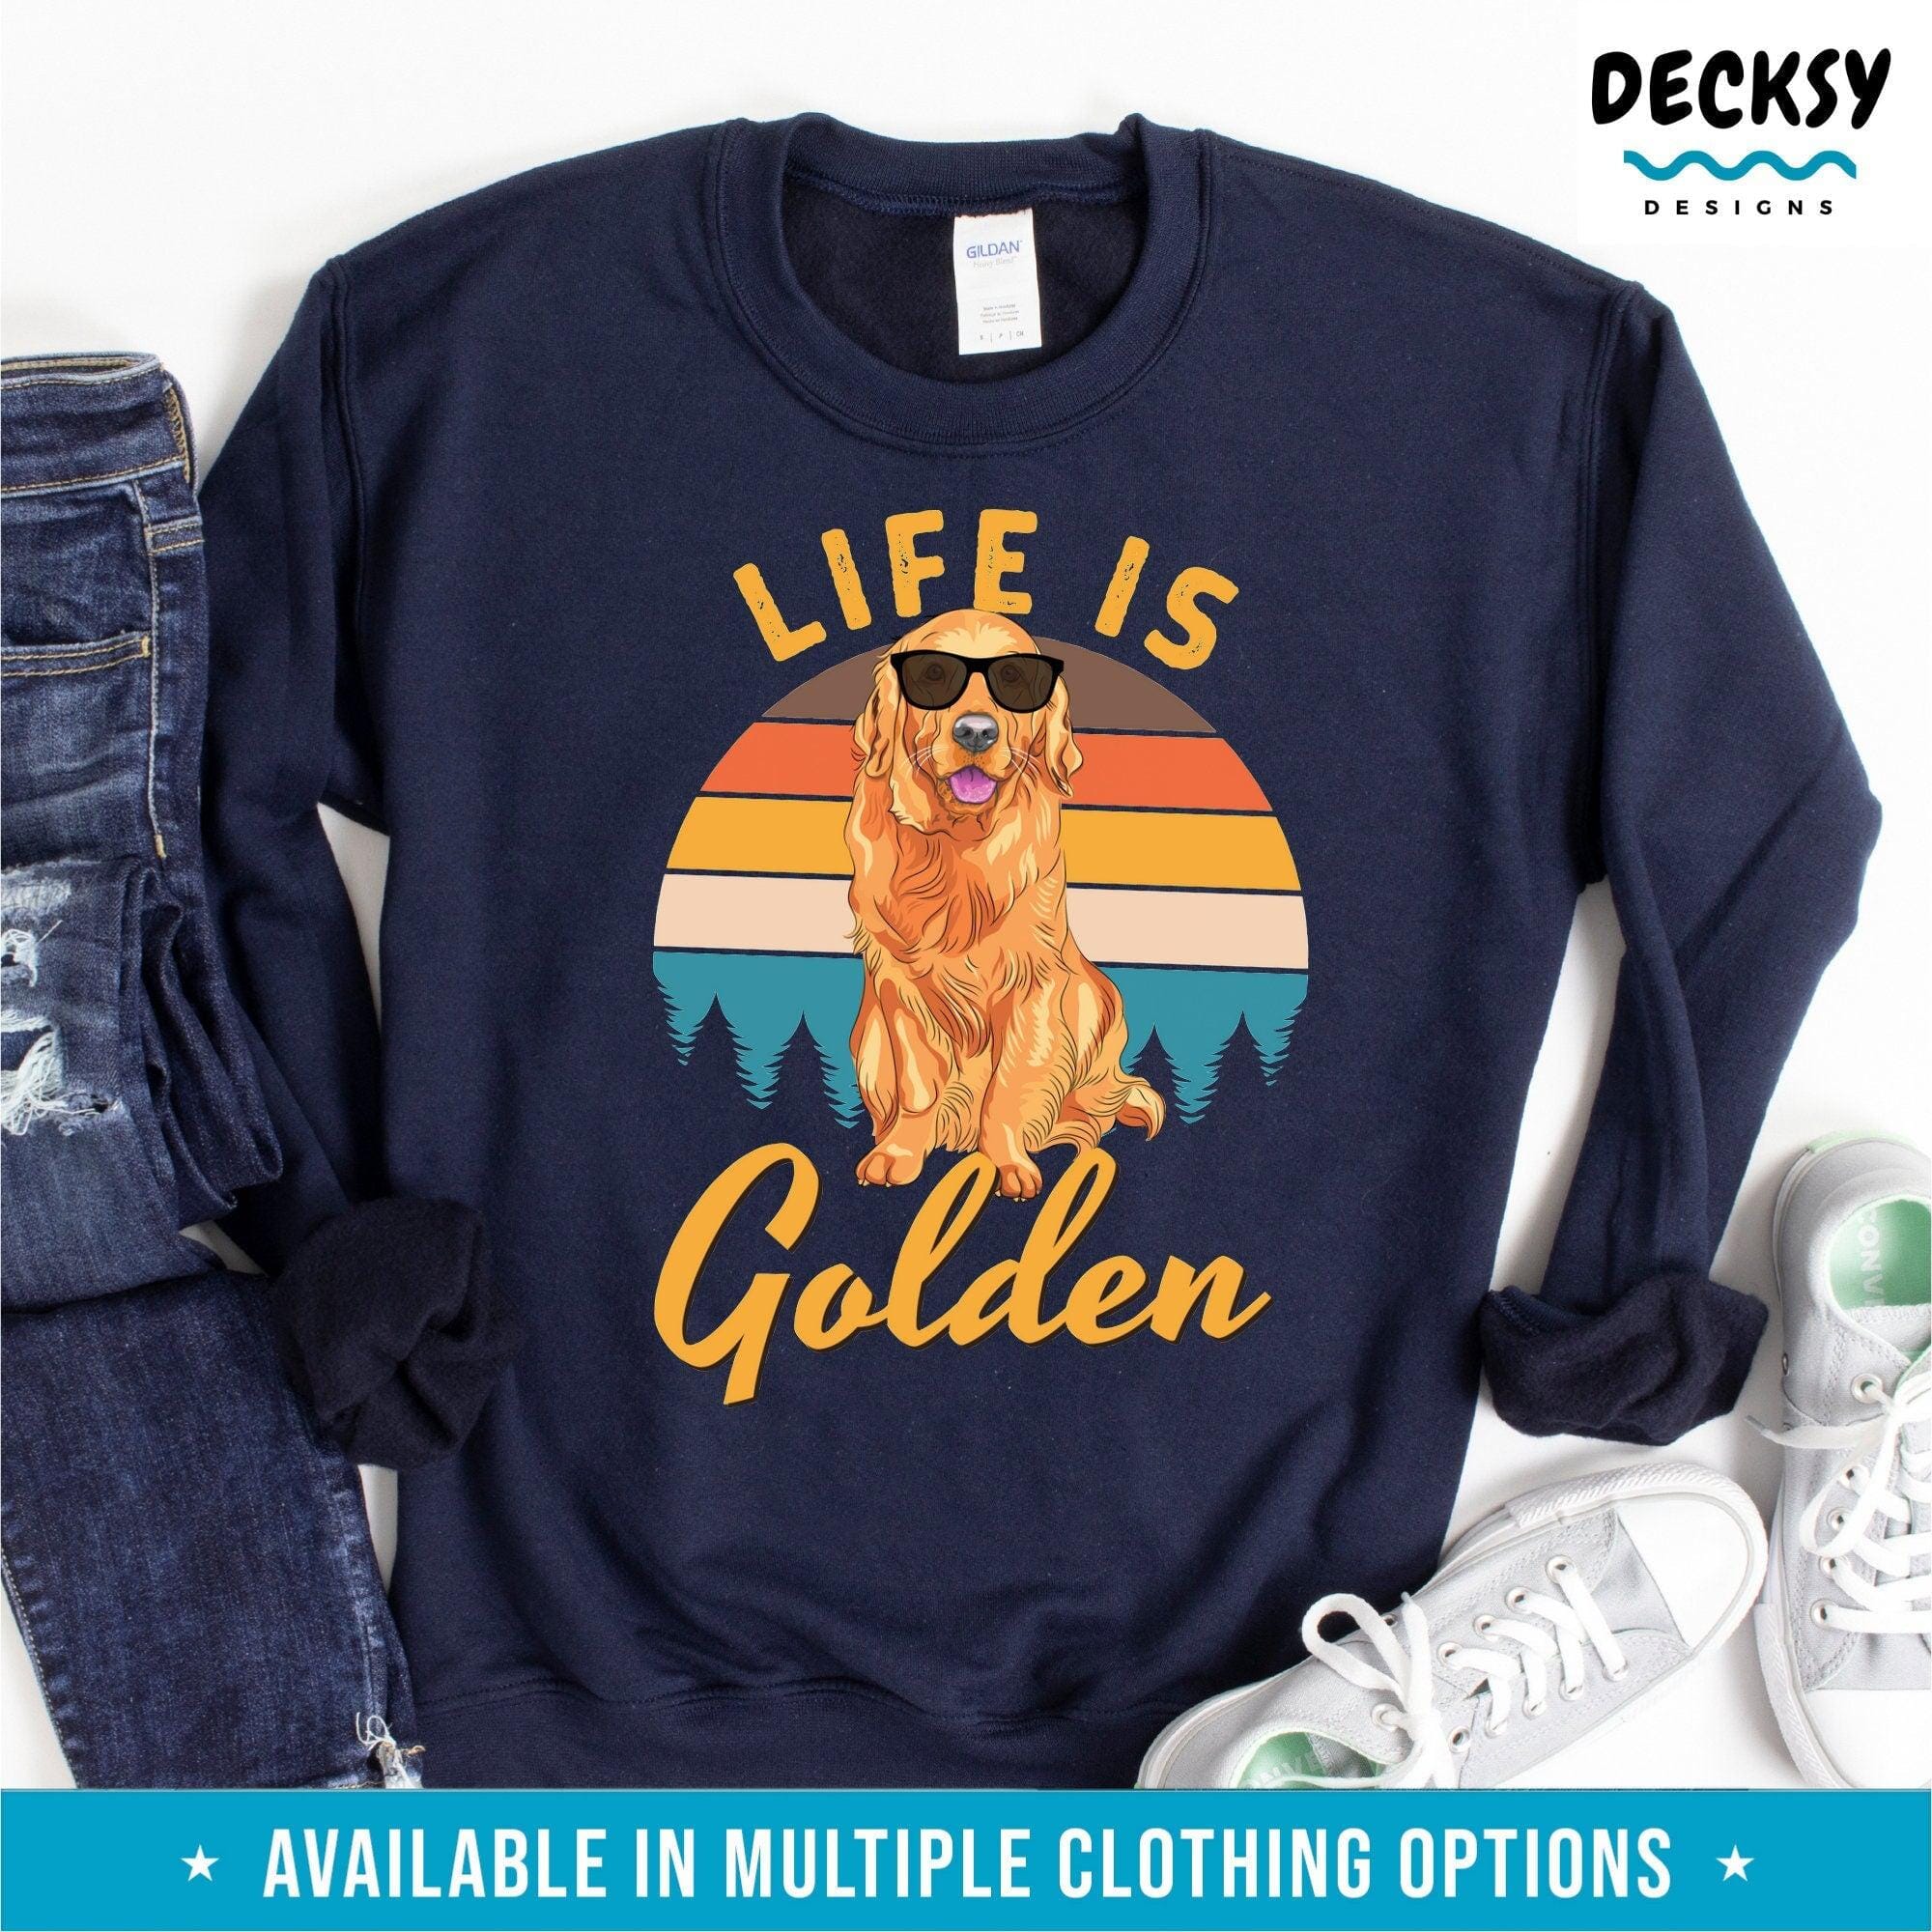 Golden Retriever Shirt, Gift for Golden Retriever Dog Lover-Clothing:Gender-Neutral Adult Clothing:Tops & Tees:T-shirts:Graphic Tees-DecksyDesigns